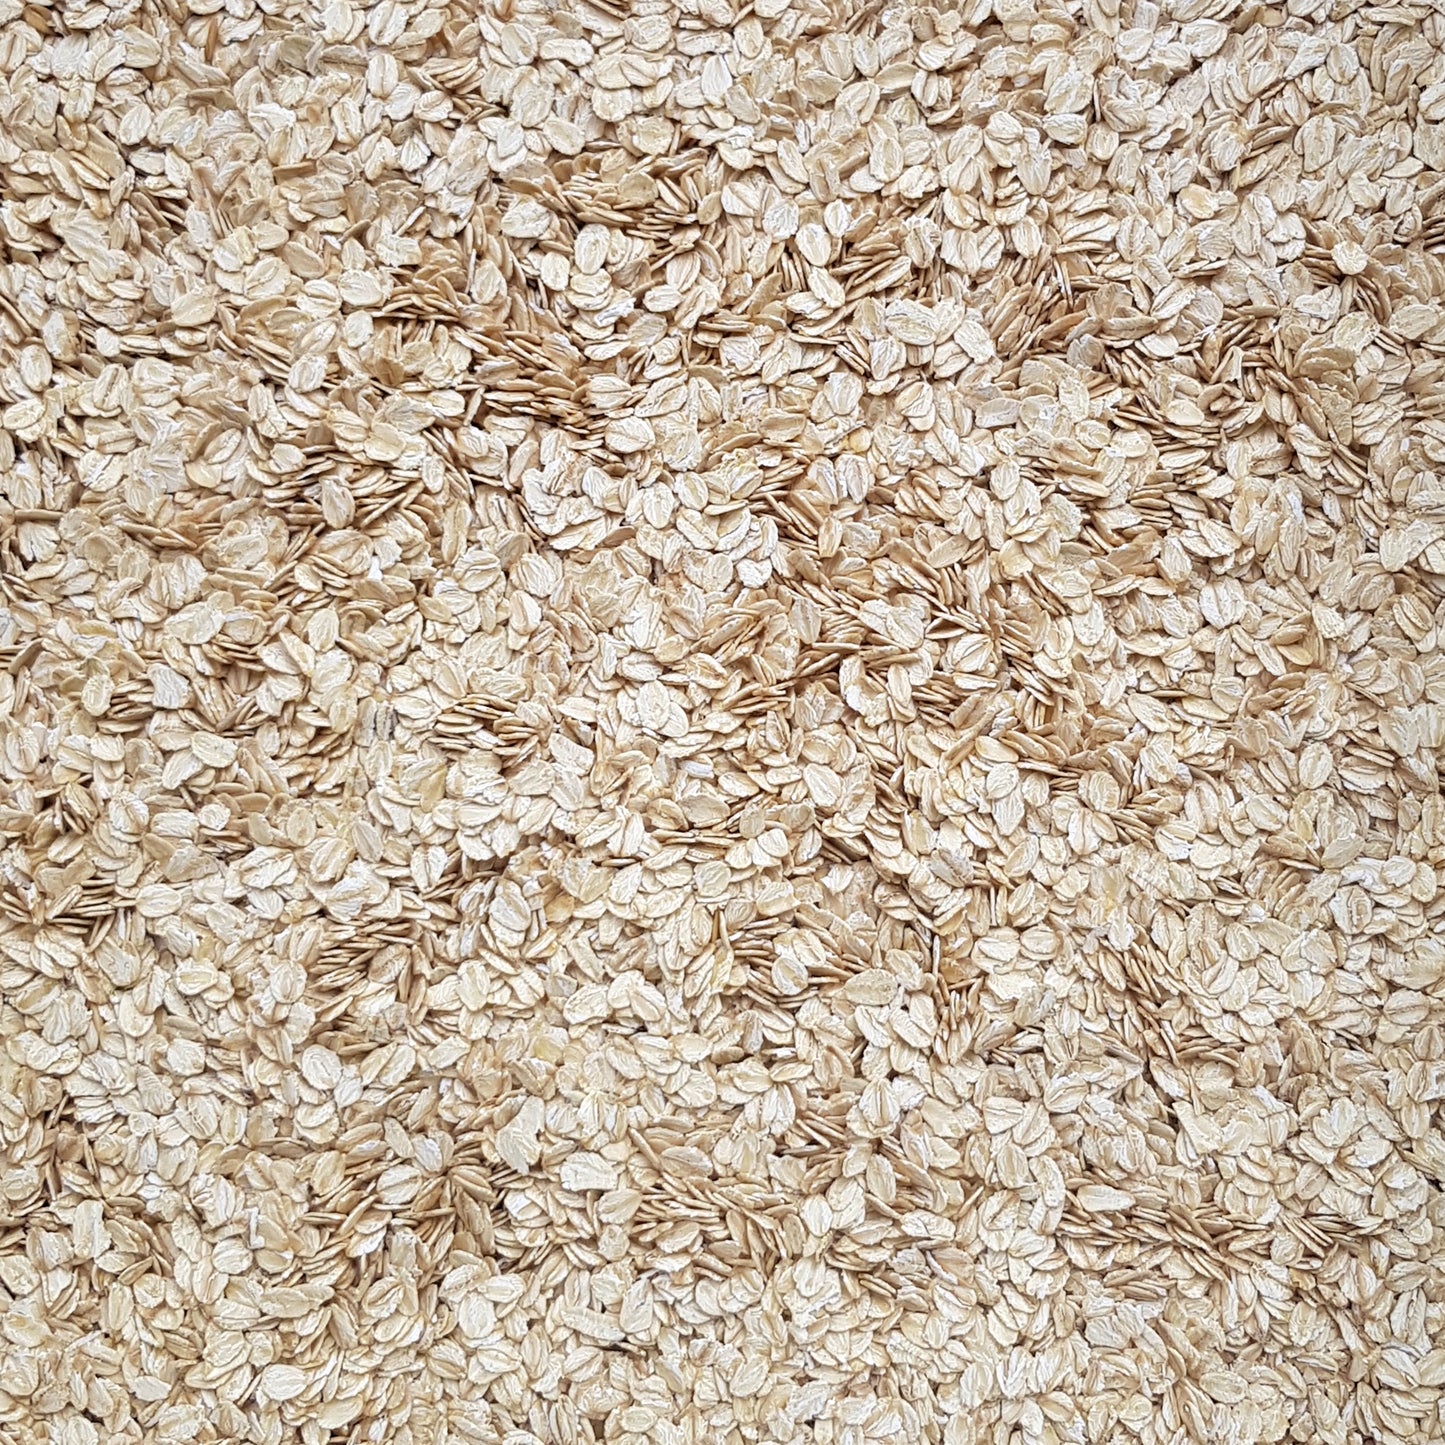 Full frame overhead image of BY NATURE Rolled Oats - raw, certified organic at source.